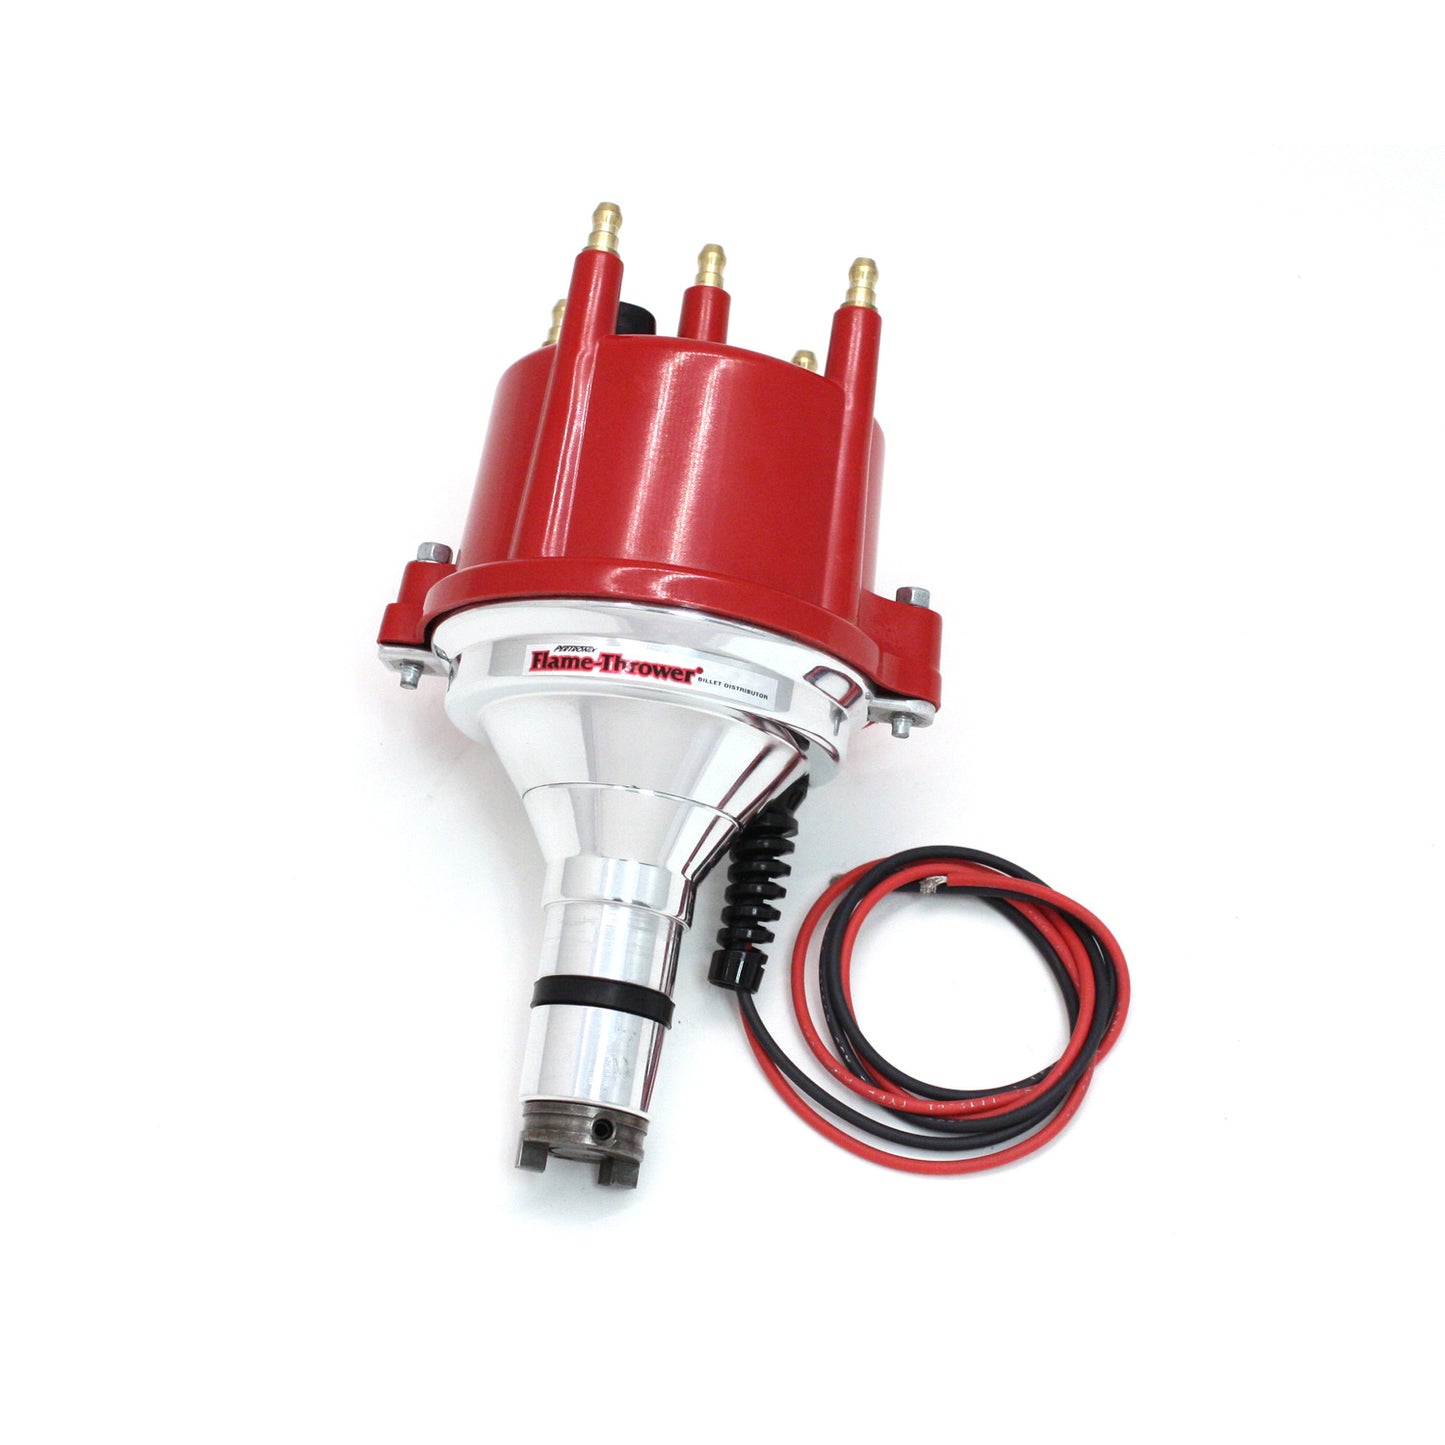 PerTronix D186811 Flame-Thrower Electronic Distributor Billet VW Type 1 Engine Plug and Play with Ignitor Non Vacuum Red Cap